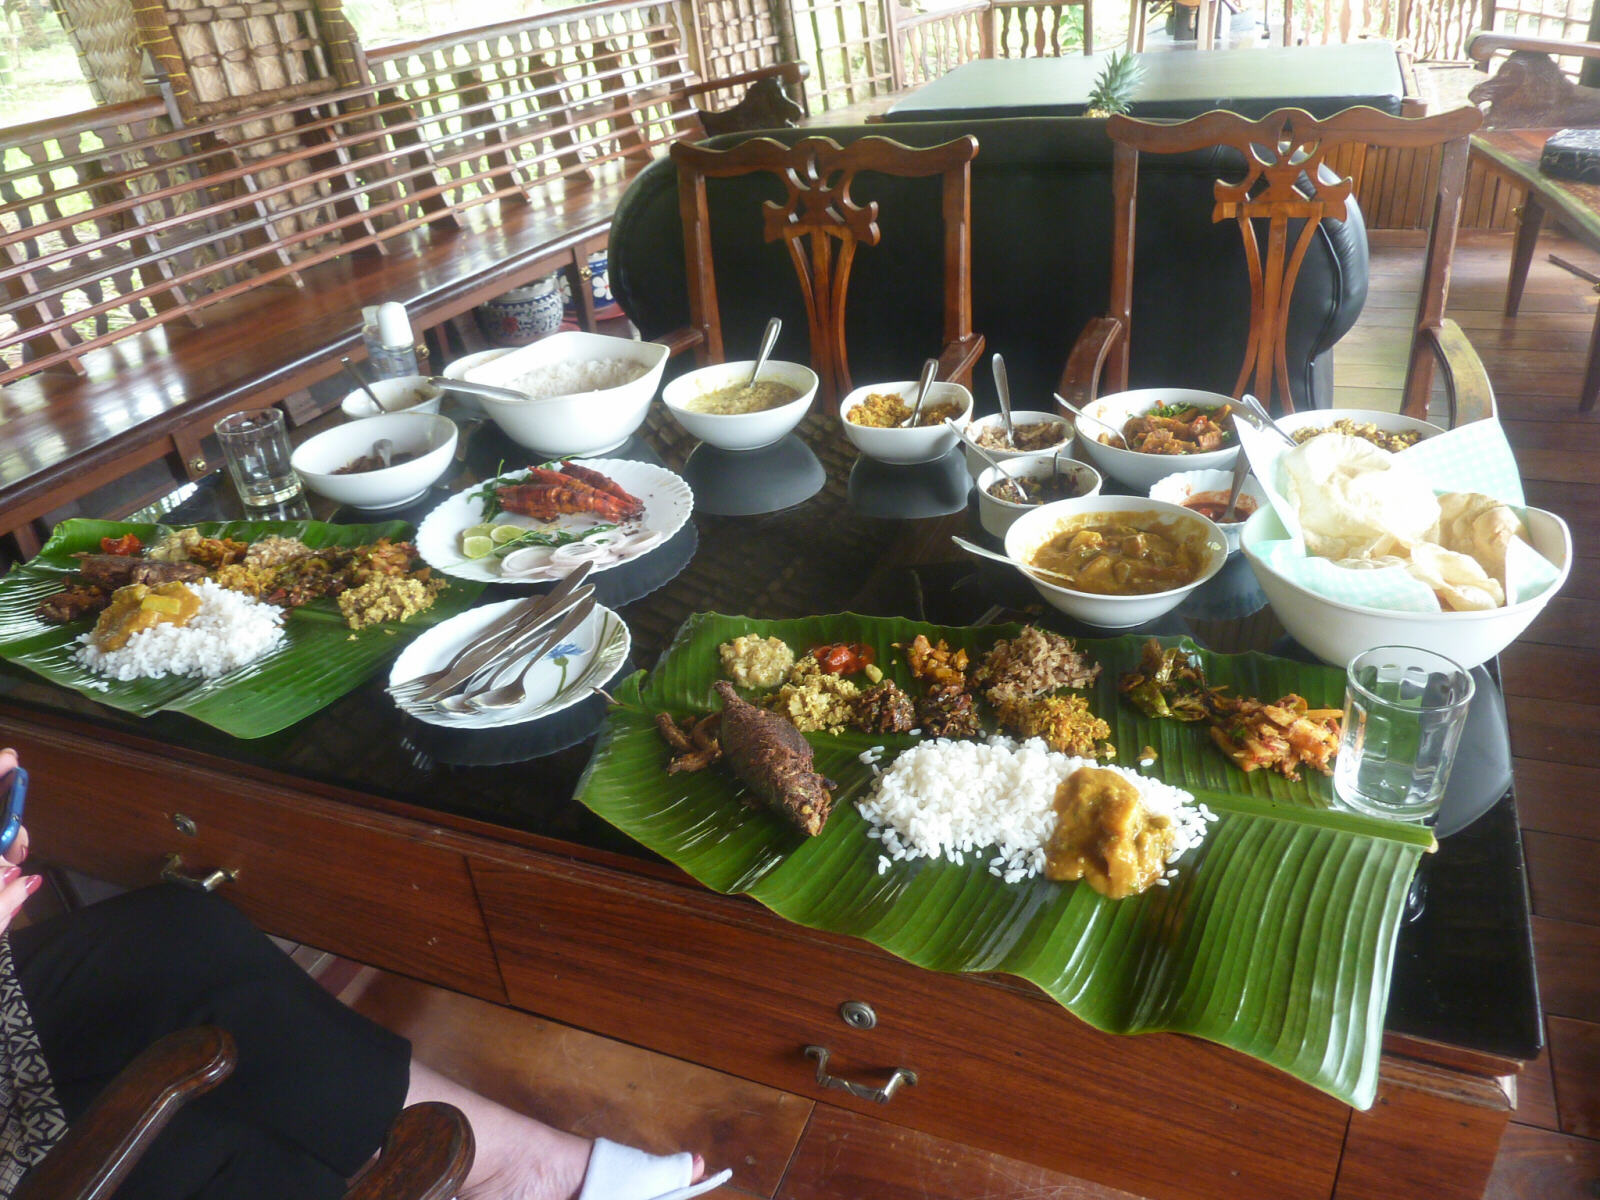 A huge lunch aboard the rice barge on the Kerala backwaters